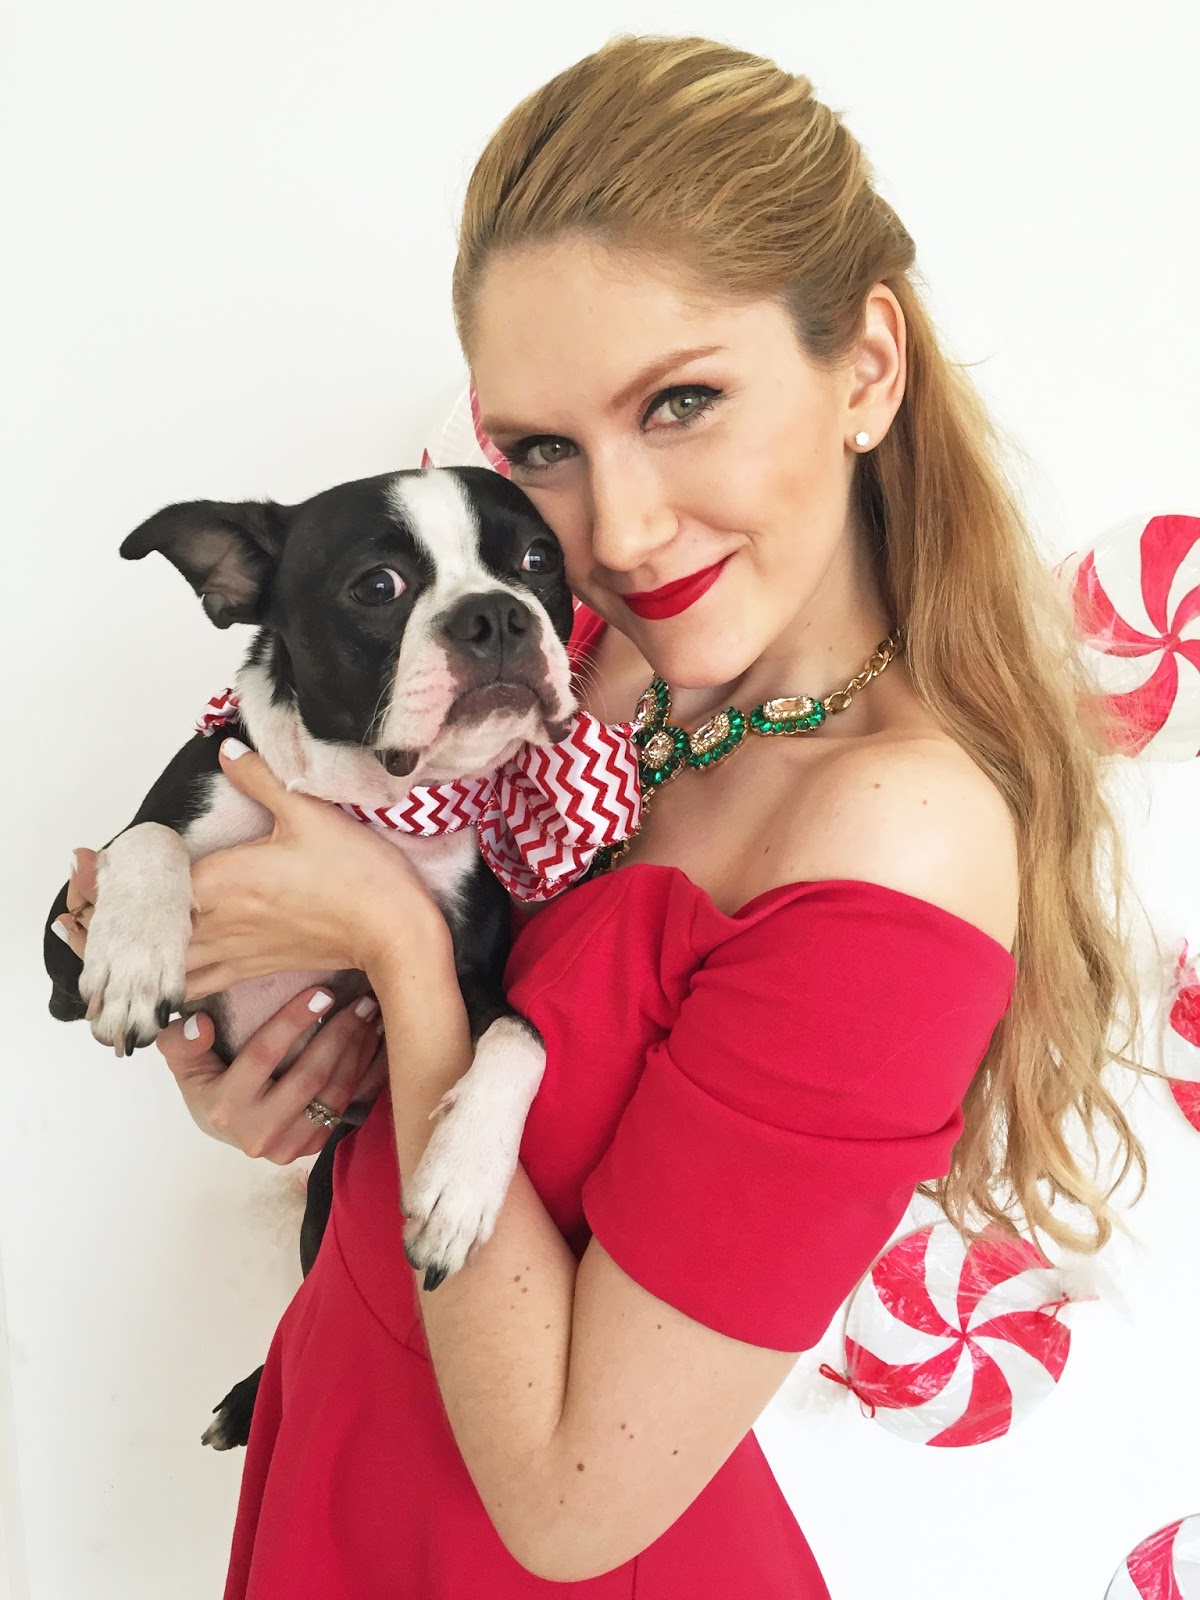 This peppermint background makes for a perfect Christmas photo with your pet or friends! Click through to learn how to make it yourself at home!